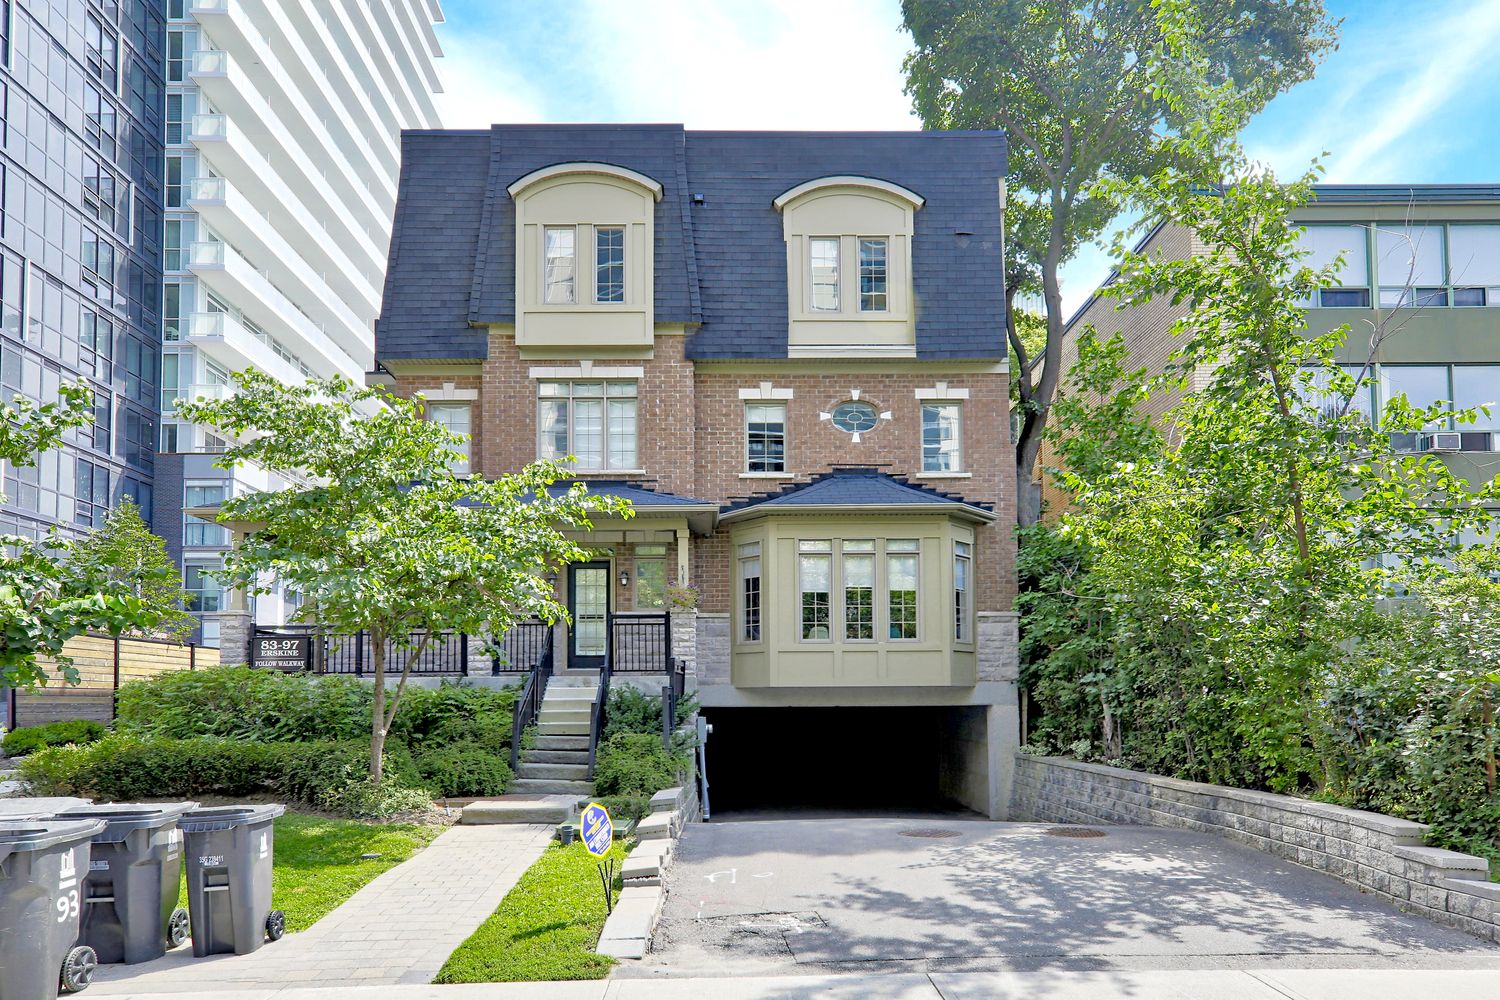 83-99 Erskine Avenue. Erskine Avenue Townhouses is located in  Midtown, Toronto - image #2 of 4